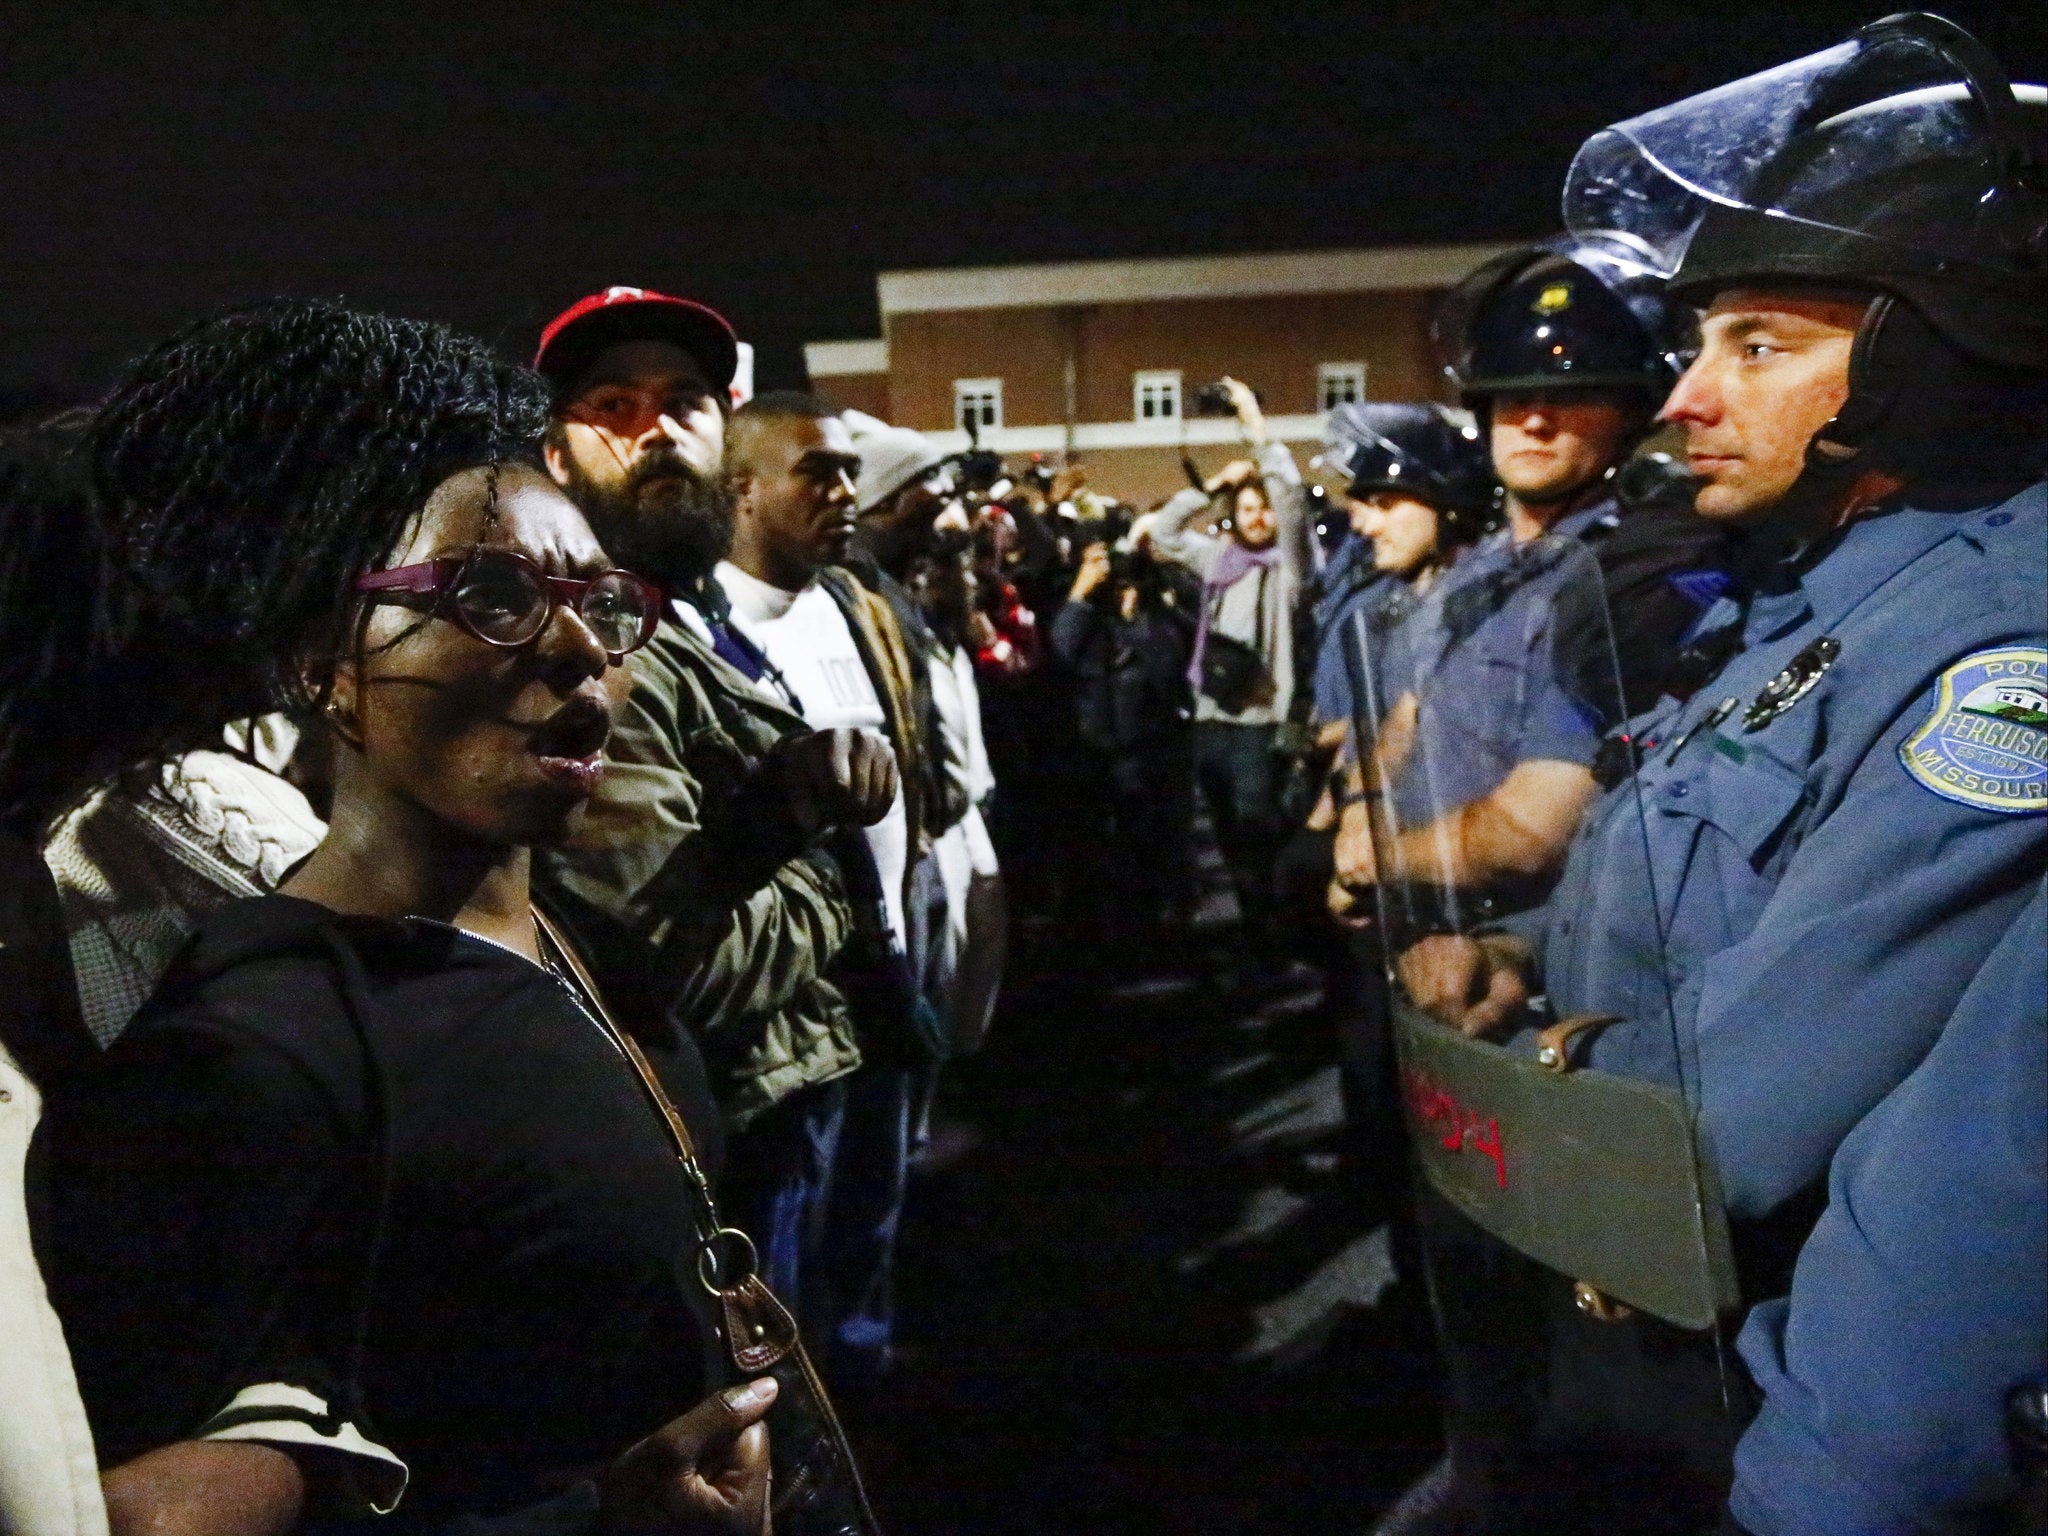 Protestors confront a police line as they march against the recent police shootings outside the Ferguson Police Department headquarters in Missouri